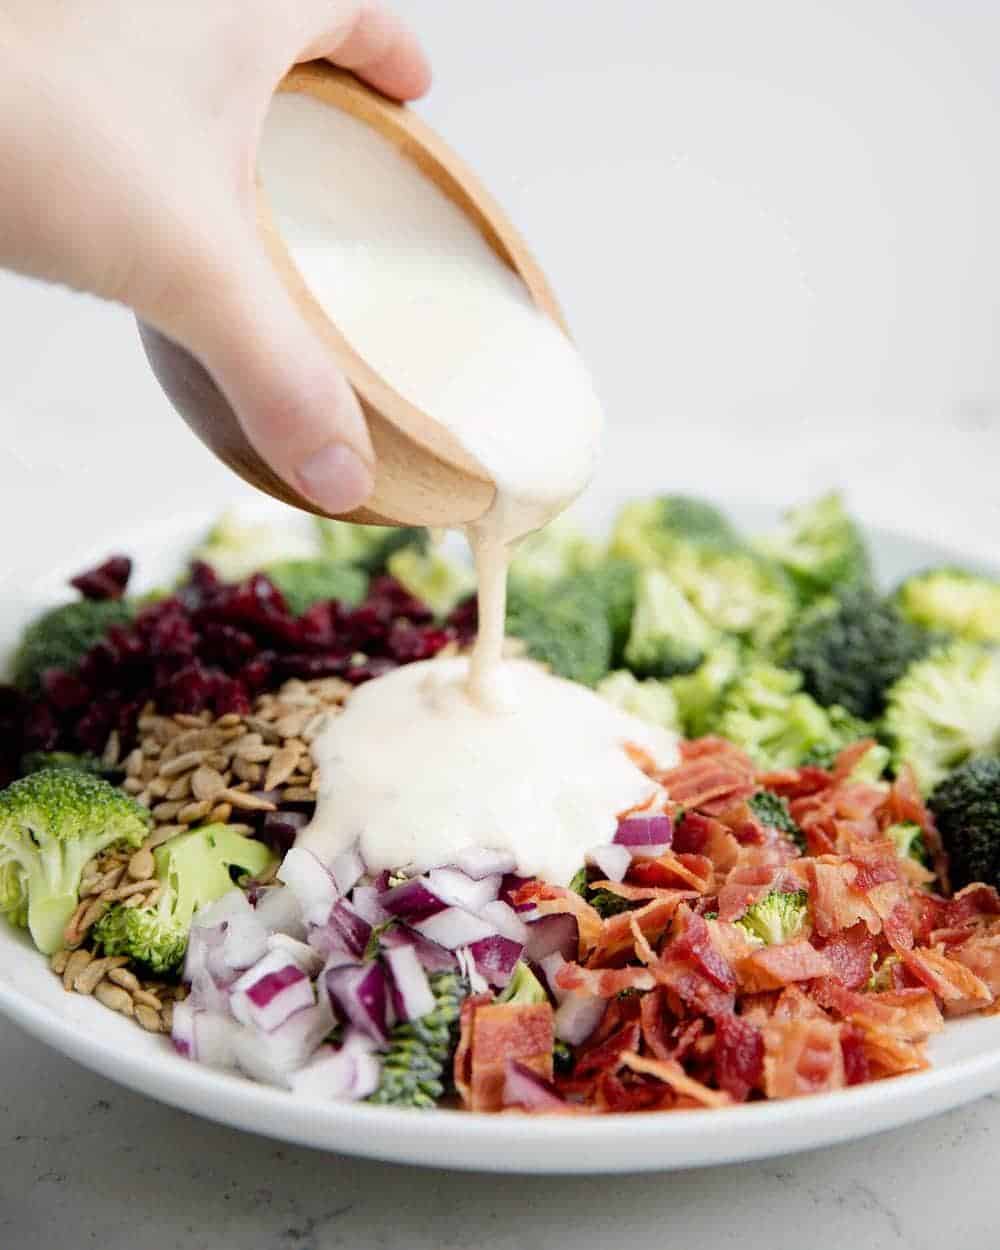 Pouring dressing over broccoli salad. 